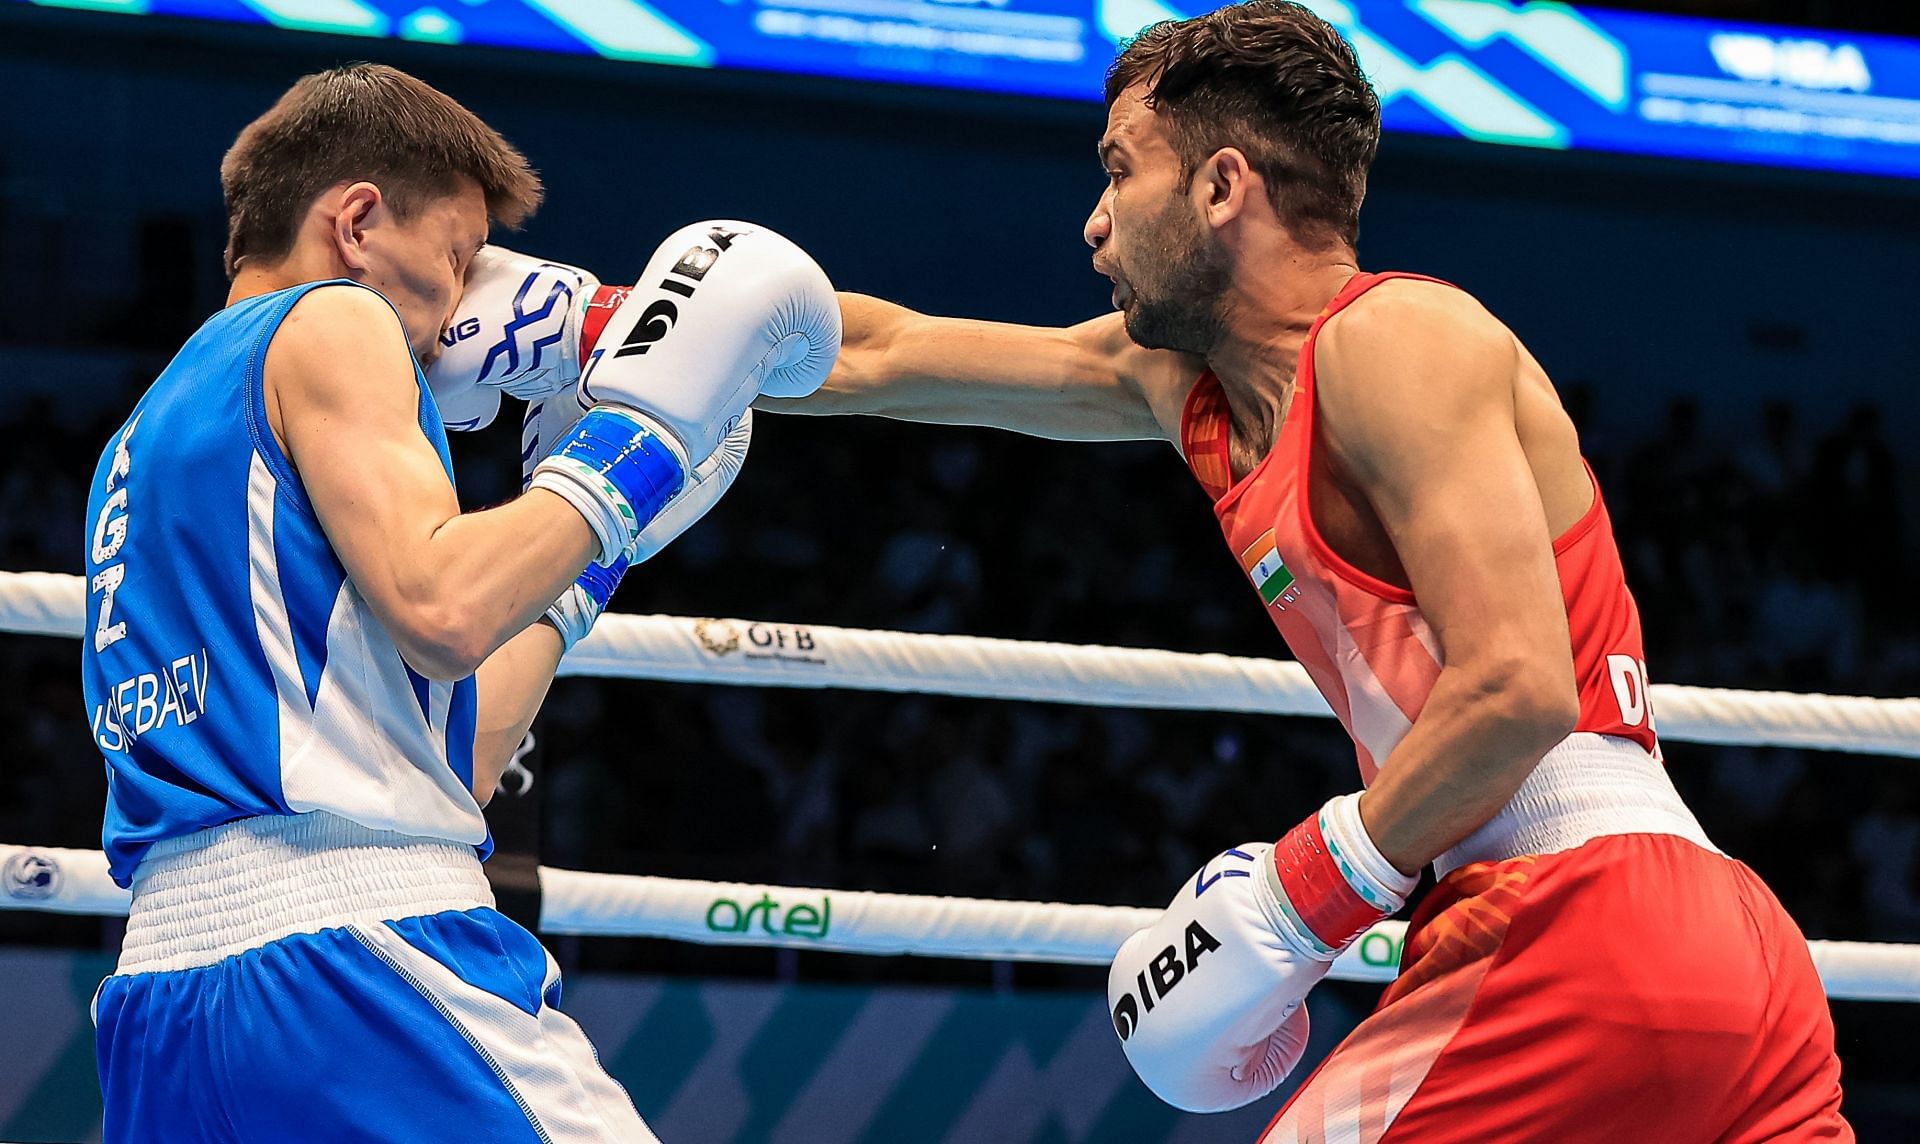 Deepak in action during his quarter-finals bout on Wednesday (Image Courtesy: BFI)